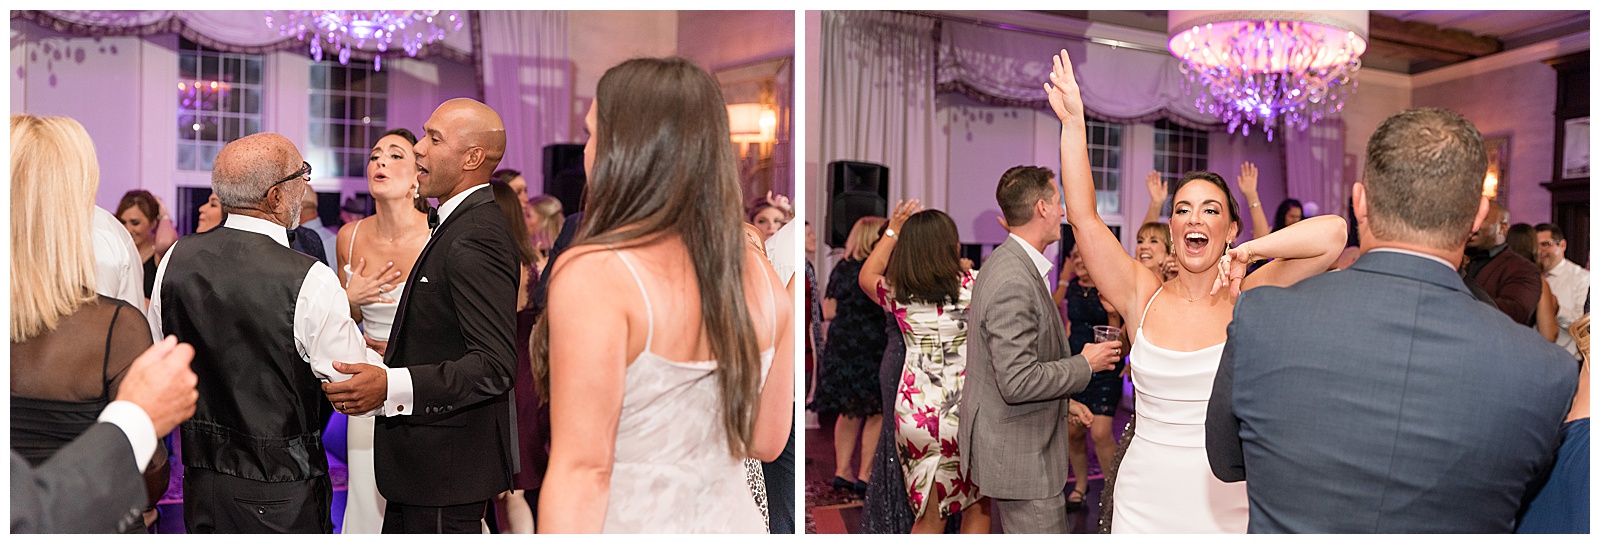 guests dancing with bride and groom at indoor country club wedding reception